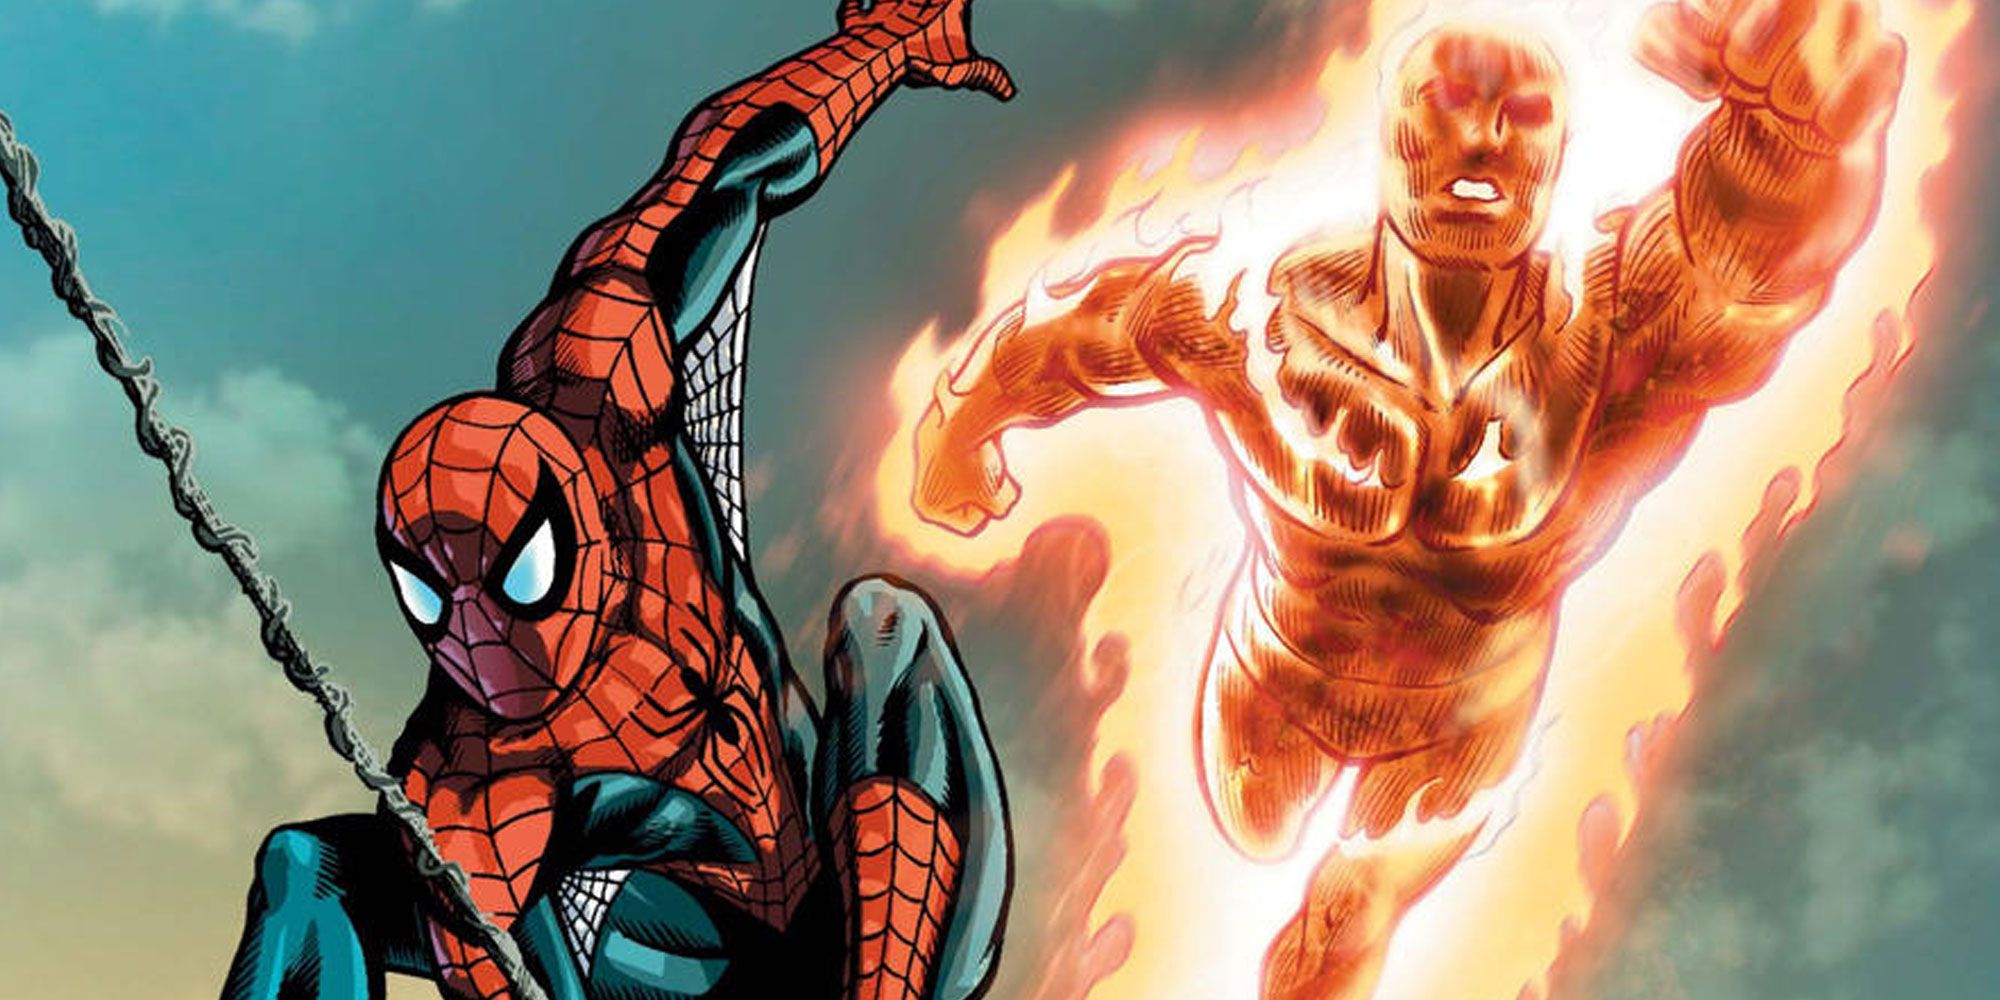 Human Torch and Spider-Man leap into battle side-by-side